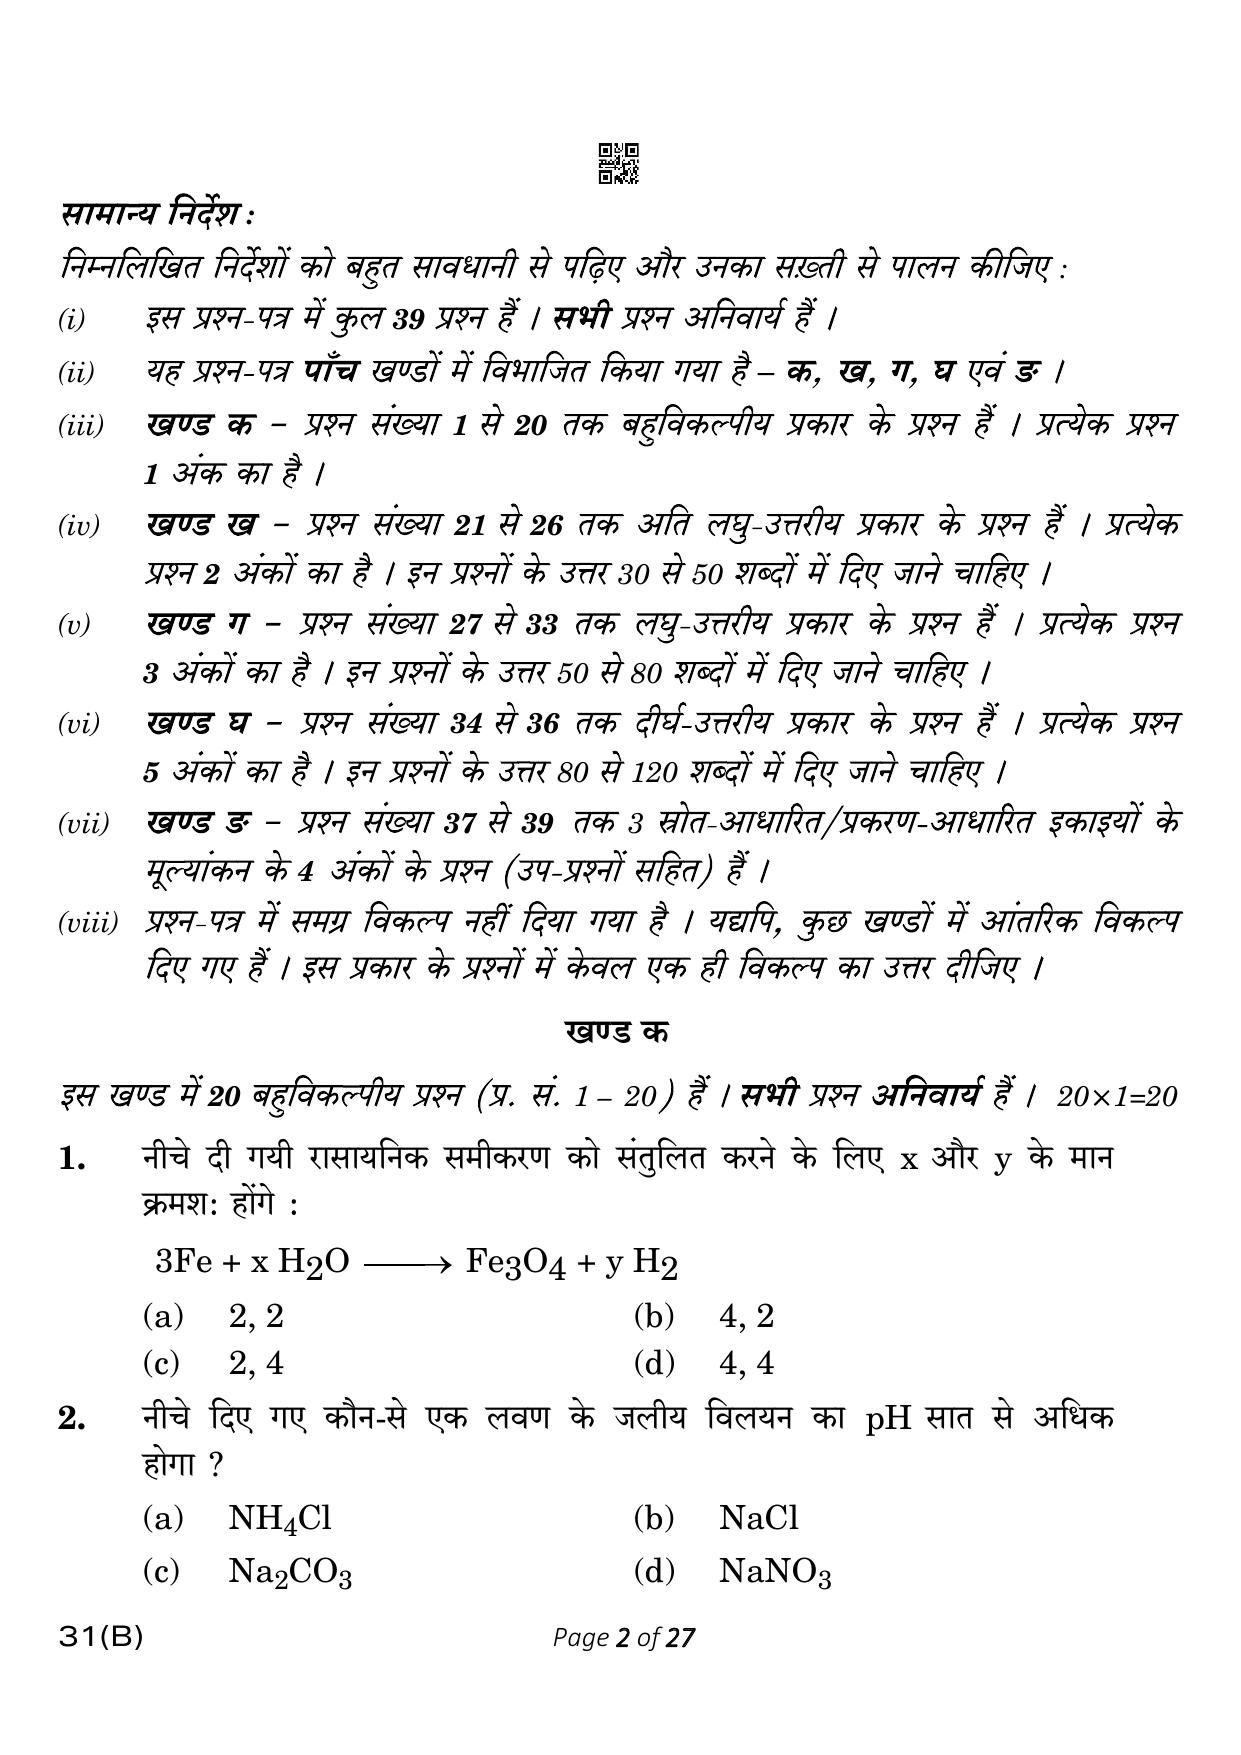 CBSE Class 10 31-B Science 2023 (Compartment) Question Paper - Page 2